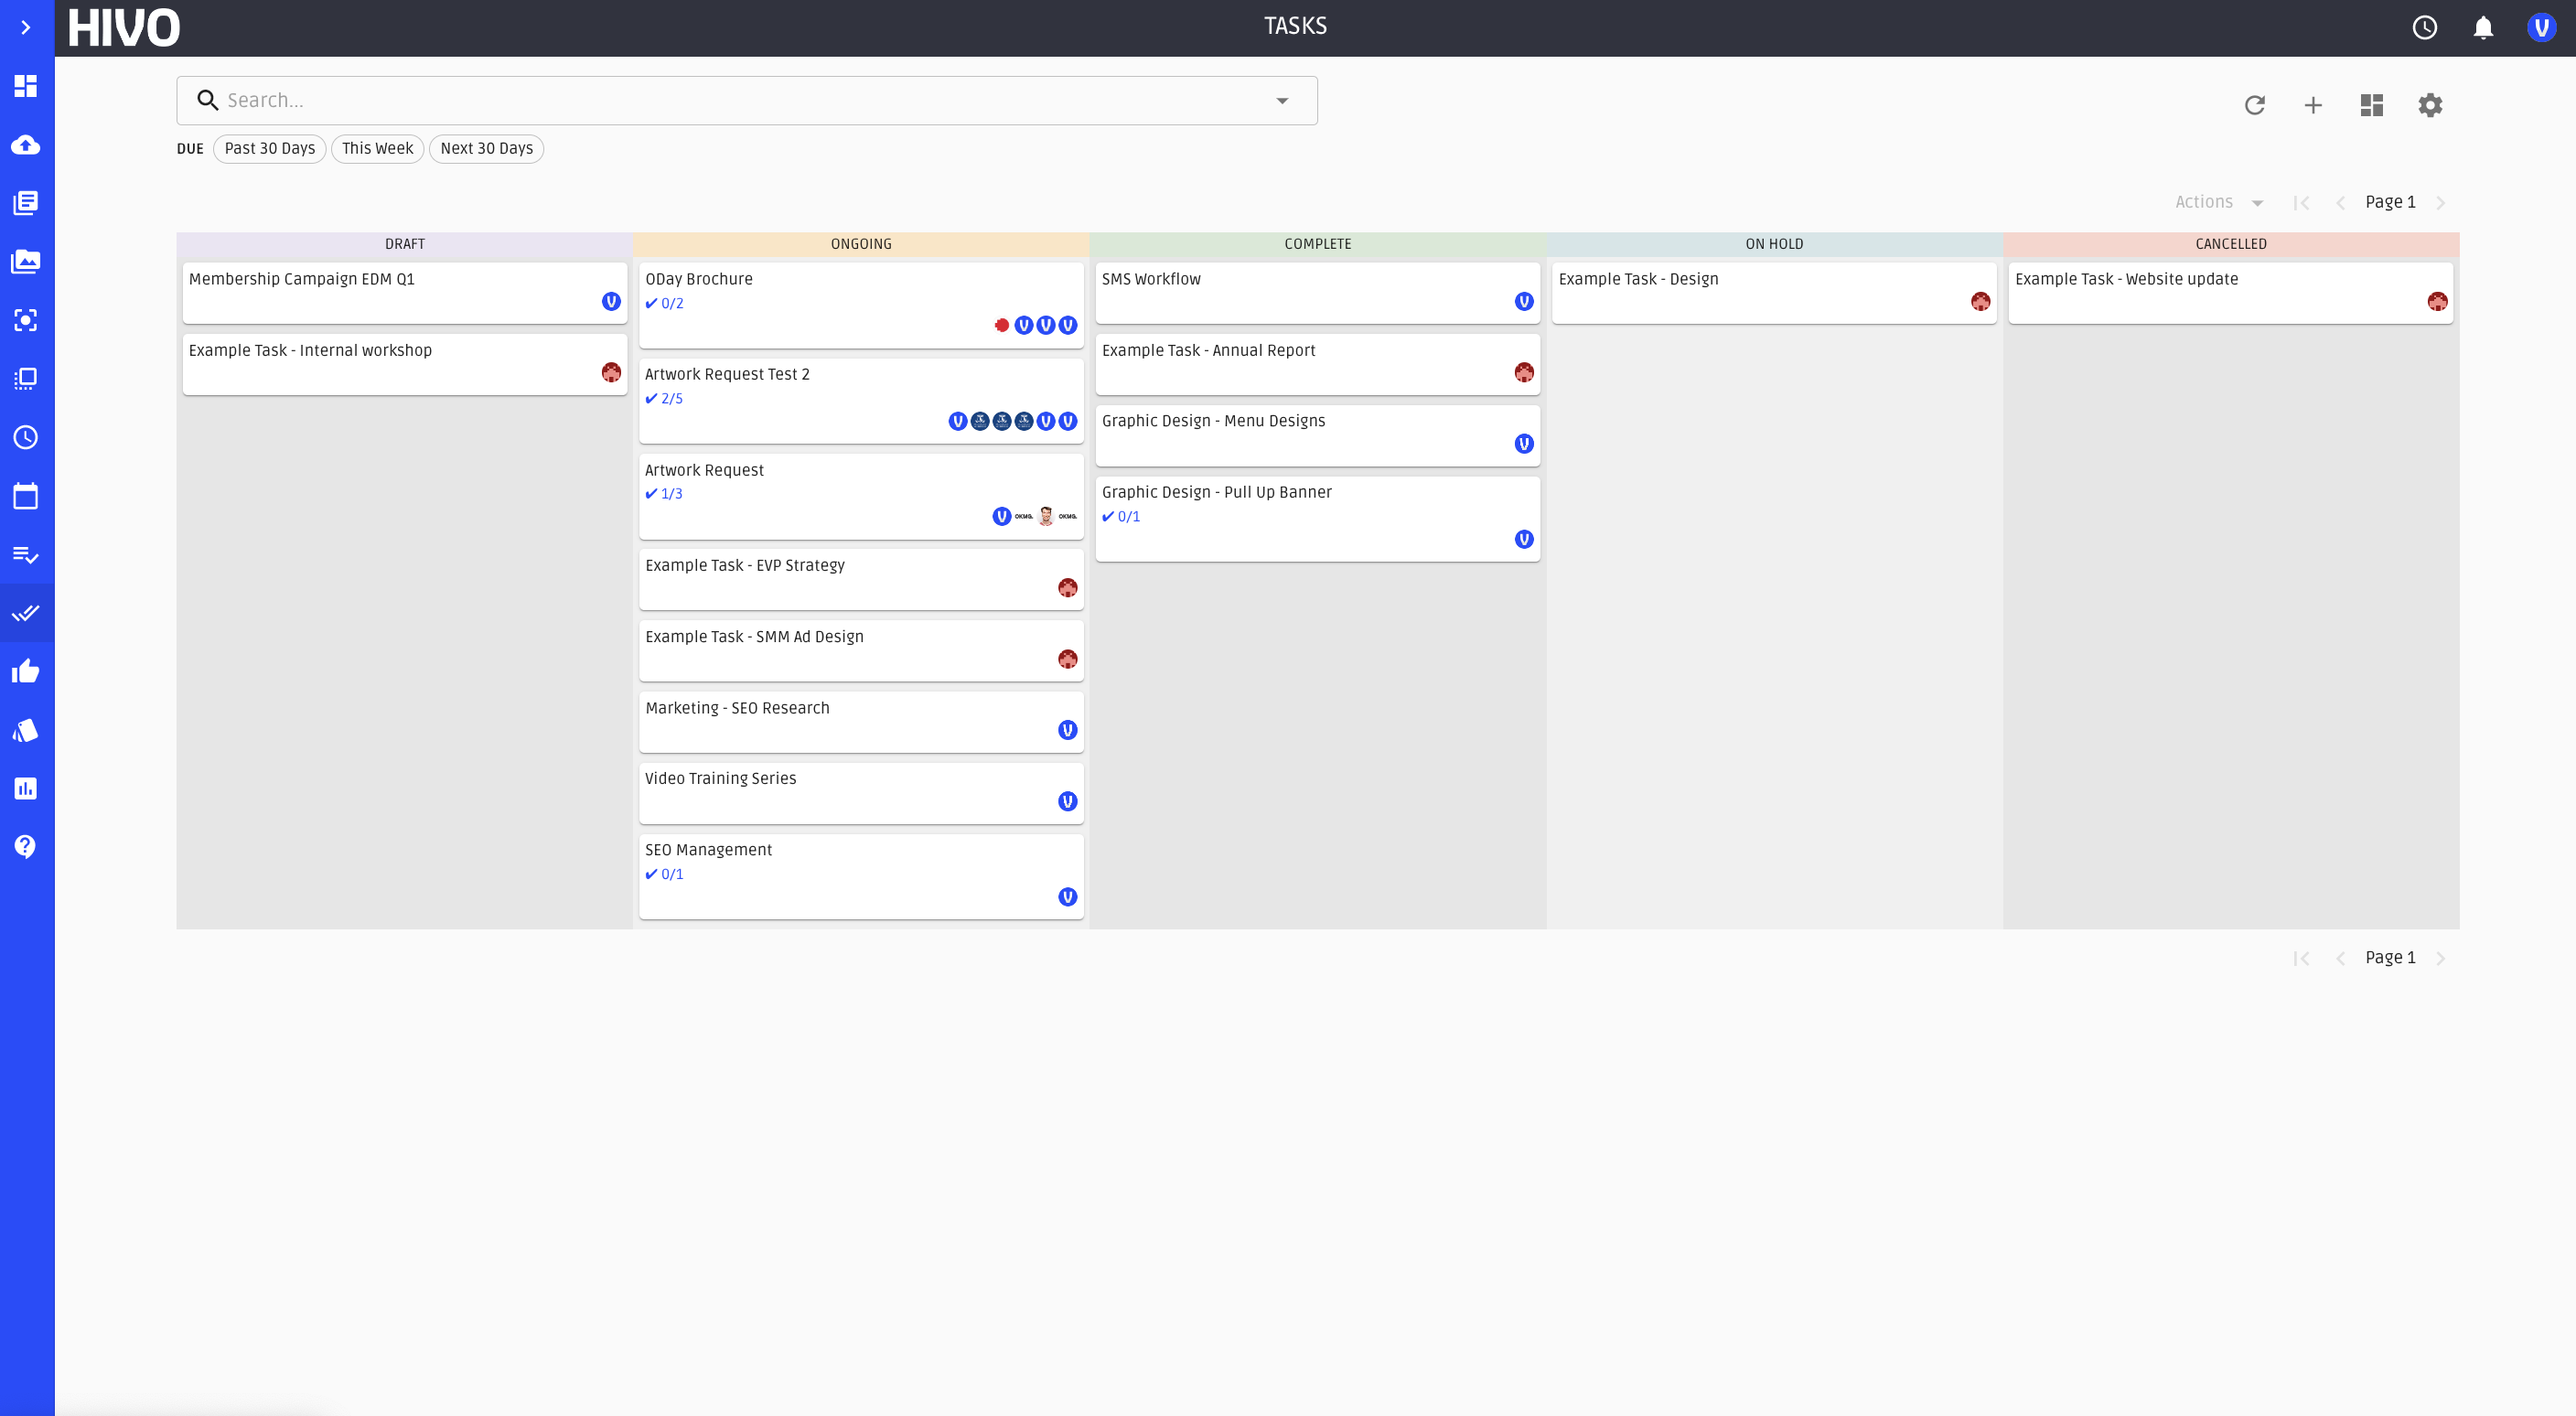 Task Manager with Briefs for Workflow Management